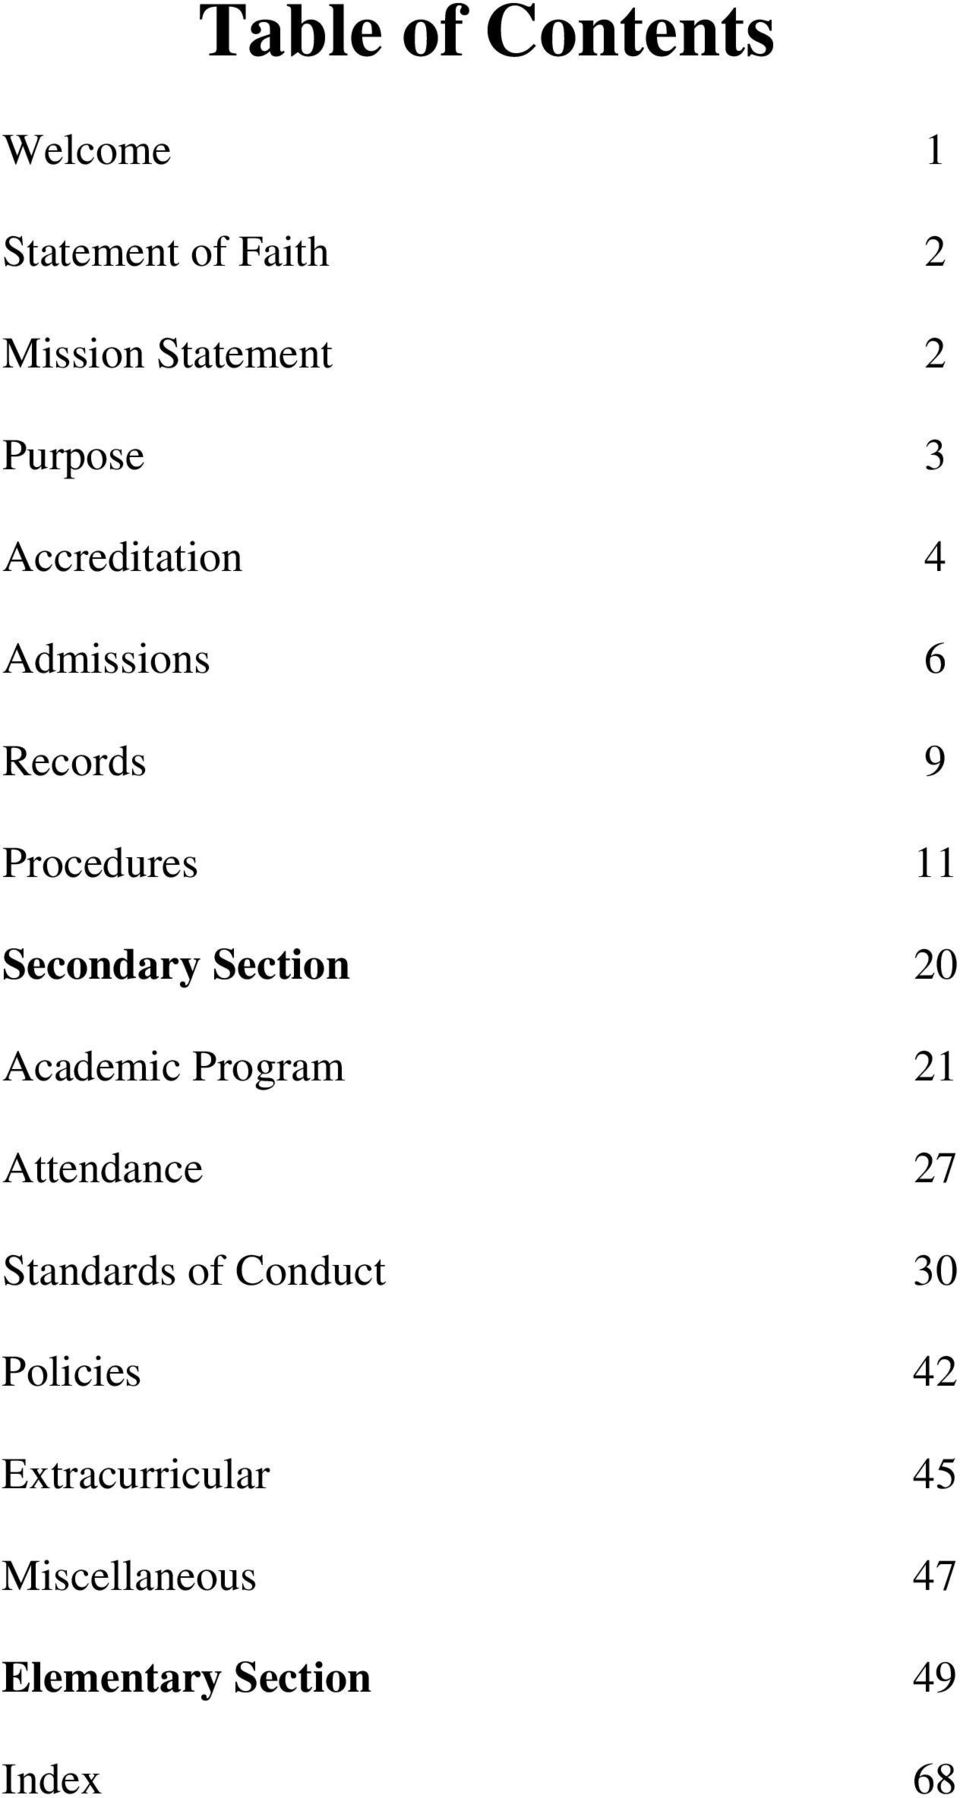 Section 20 Academic Program 21 Attendance 27 Standards of Conduct 30